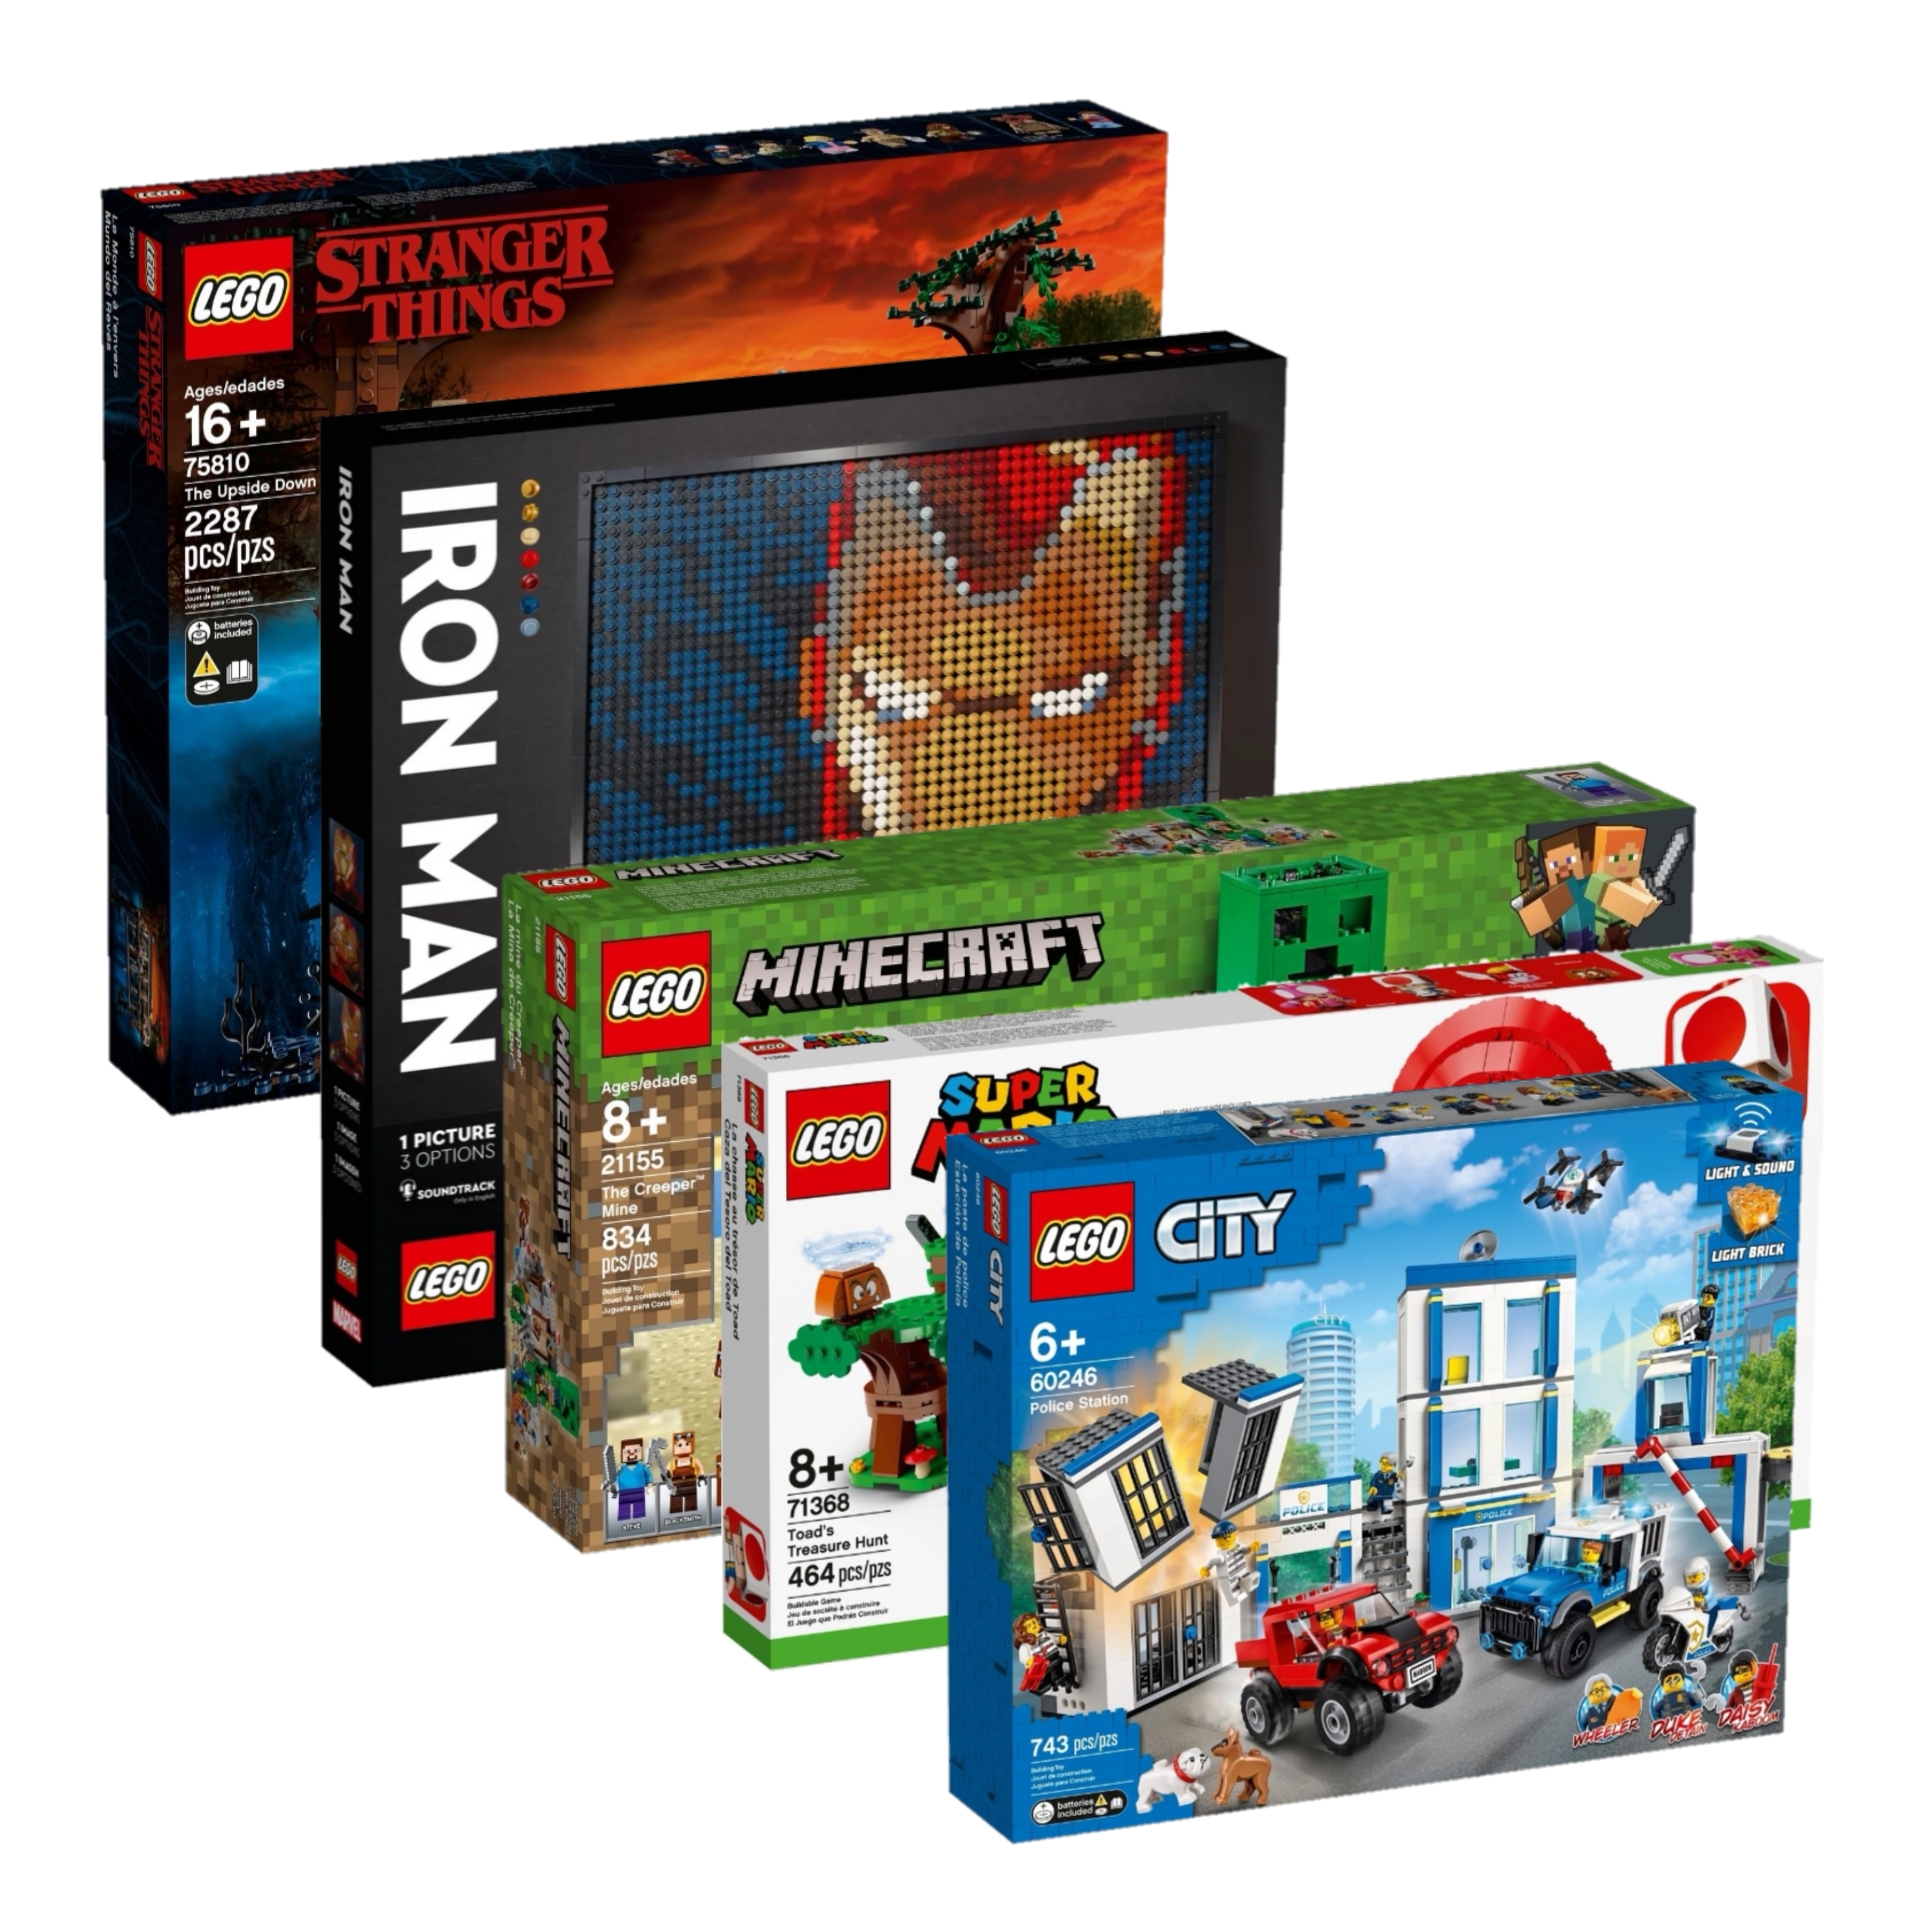 Don’t Miss Out LEGO Sets Retiring Soon! The Brick Post!